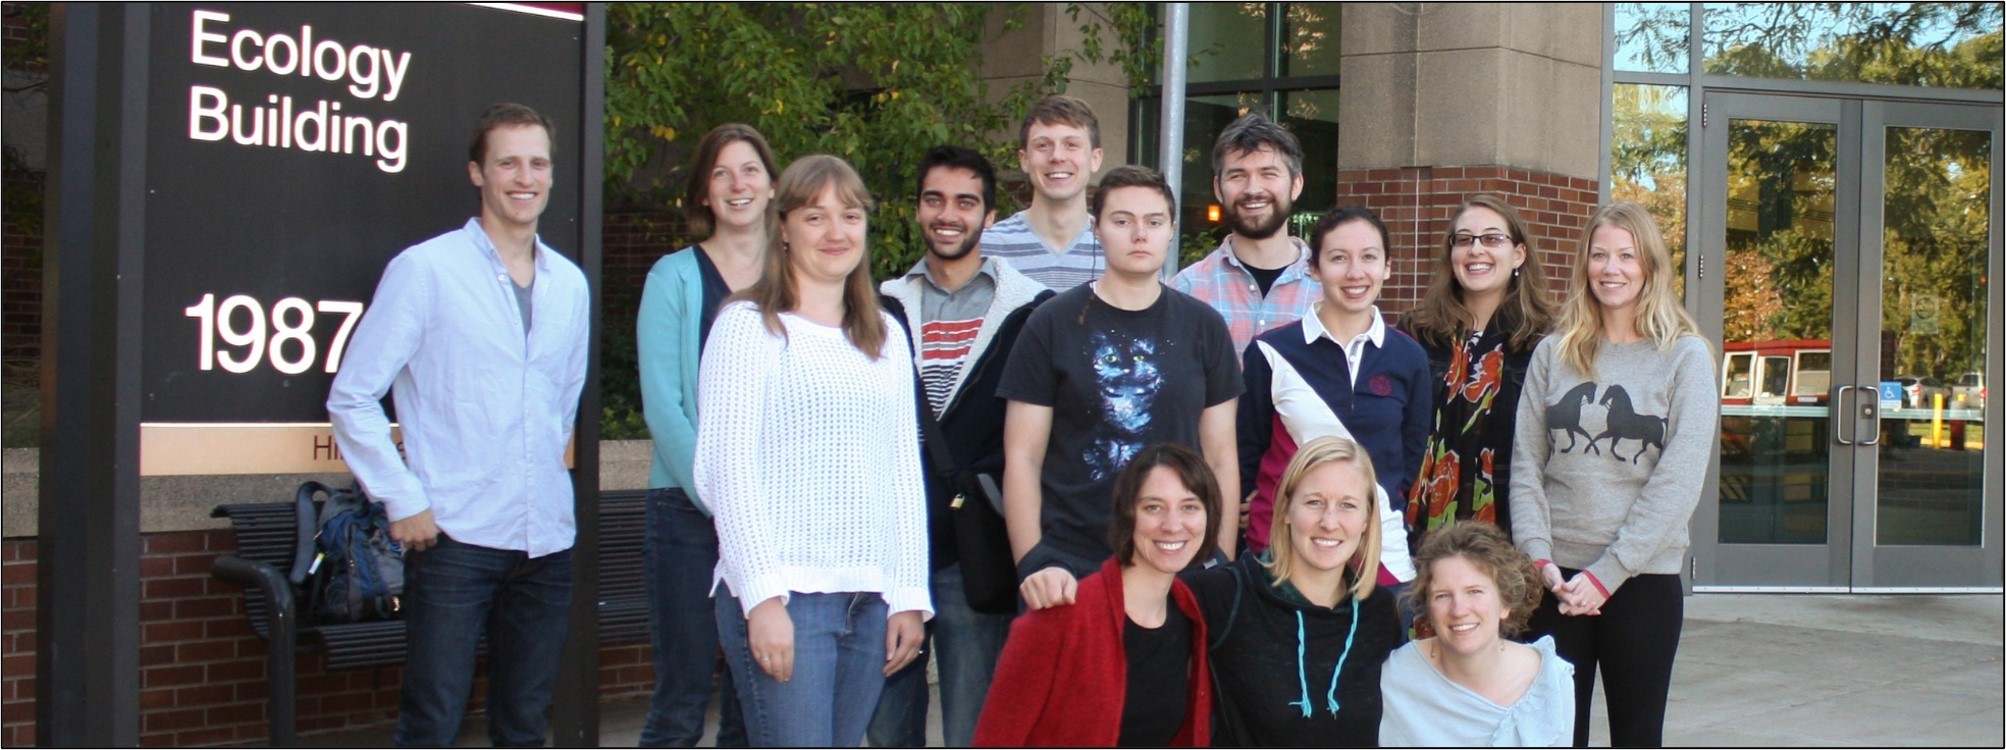 Snell-Rood lab outside of Ecology